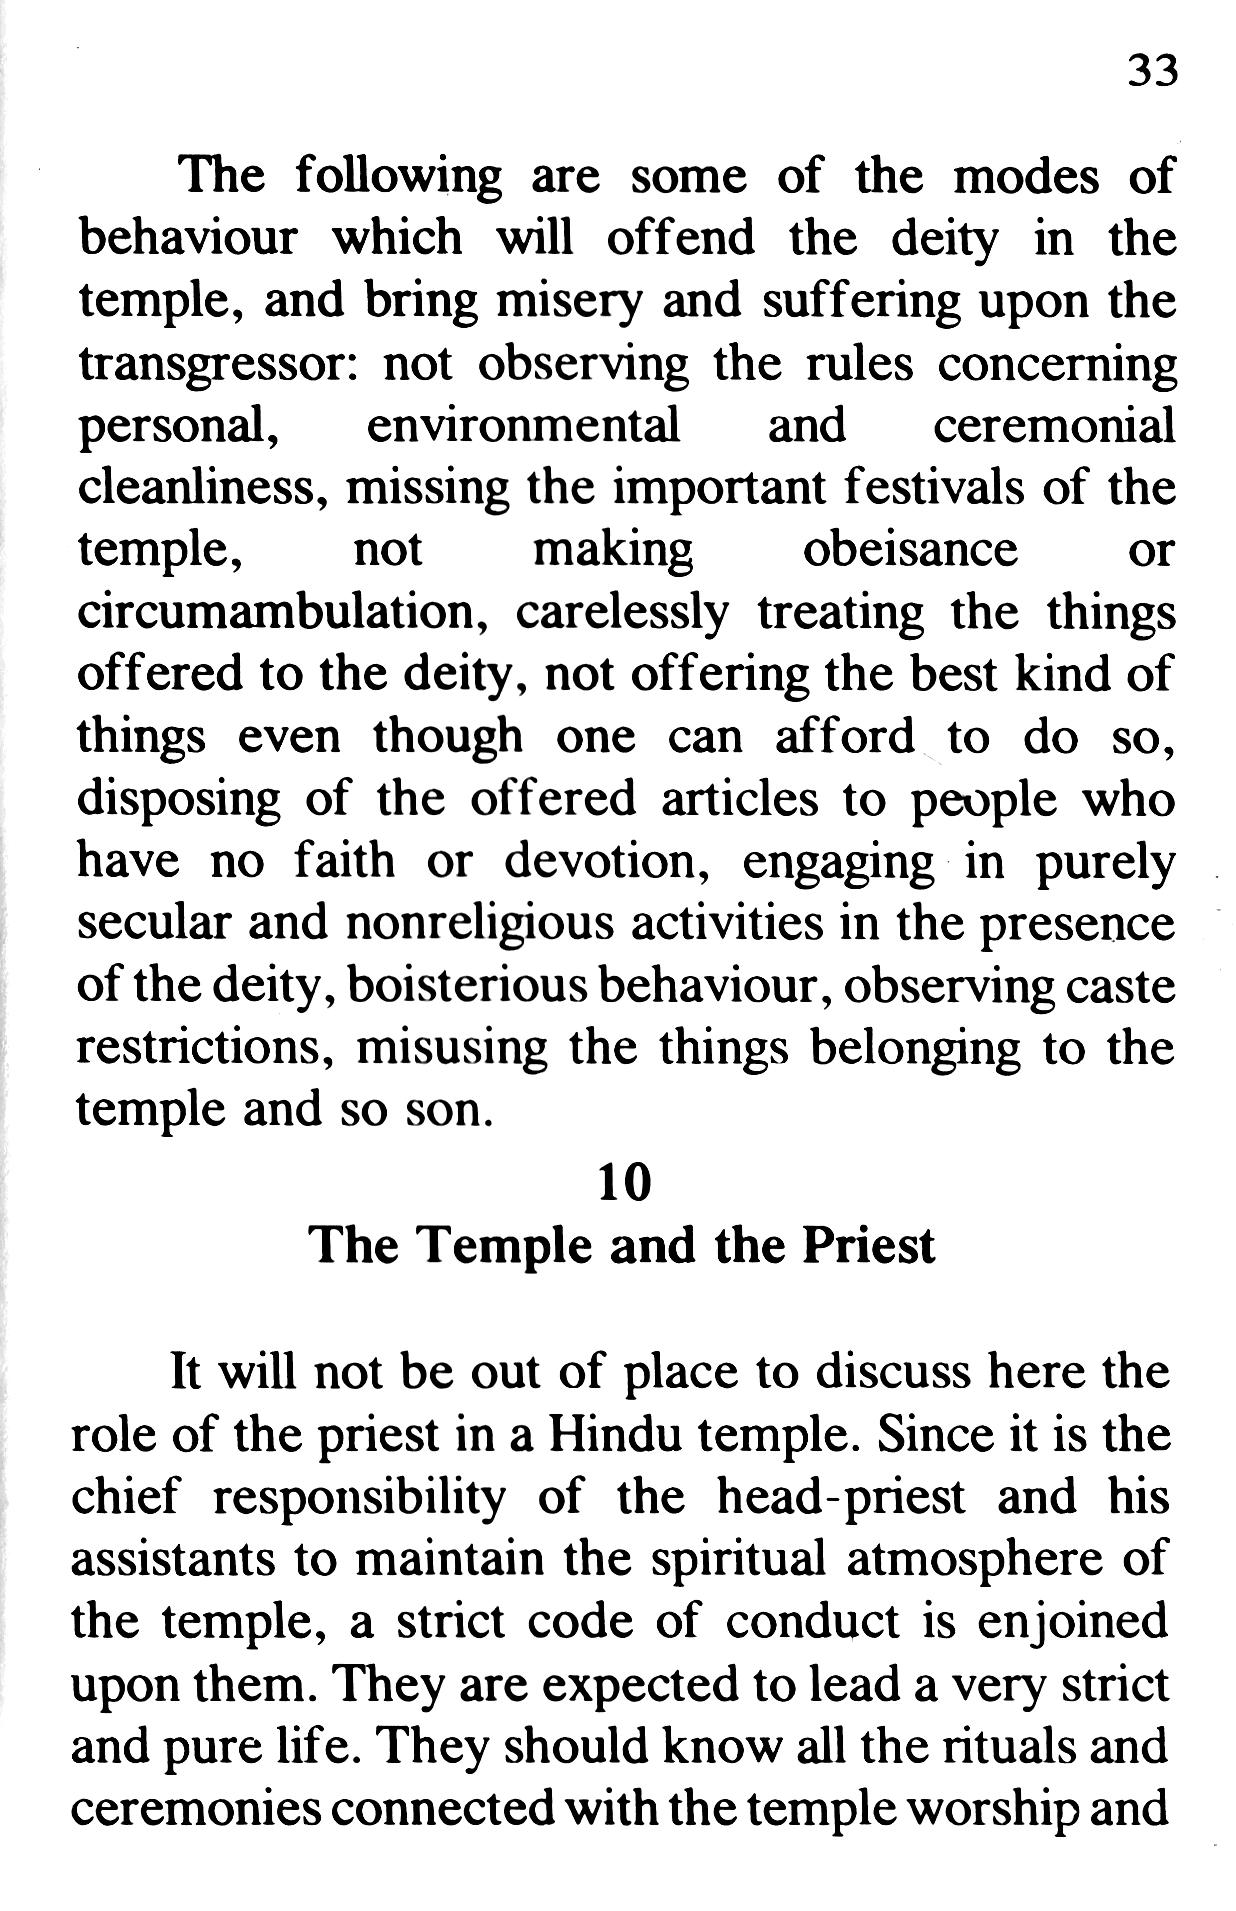 All About Hindu Temples